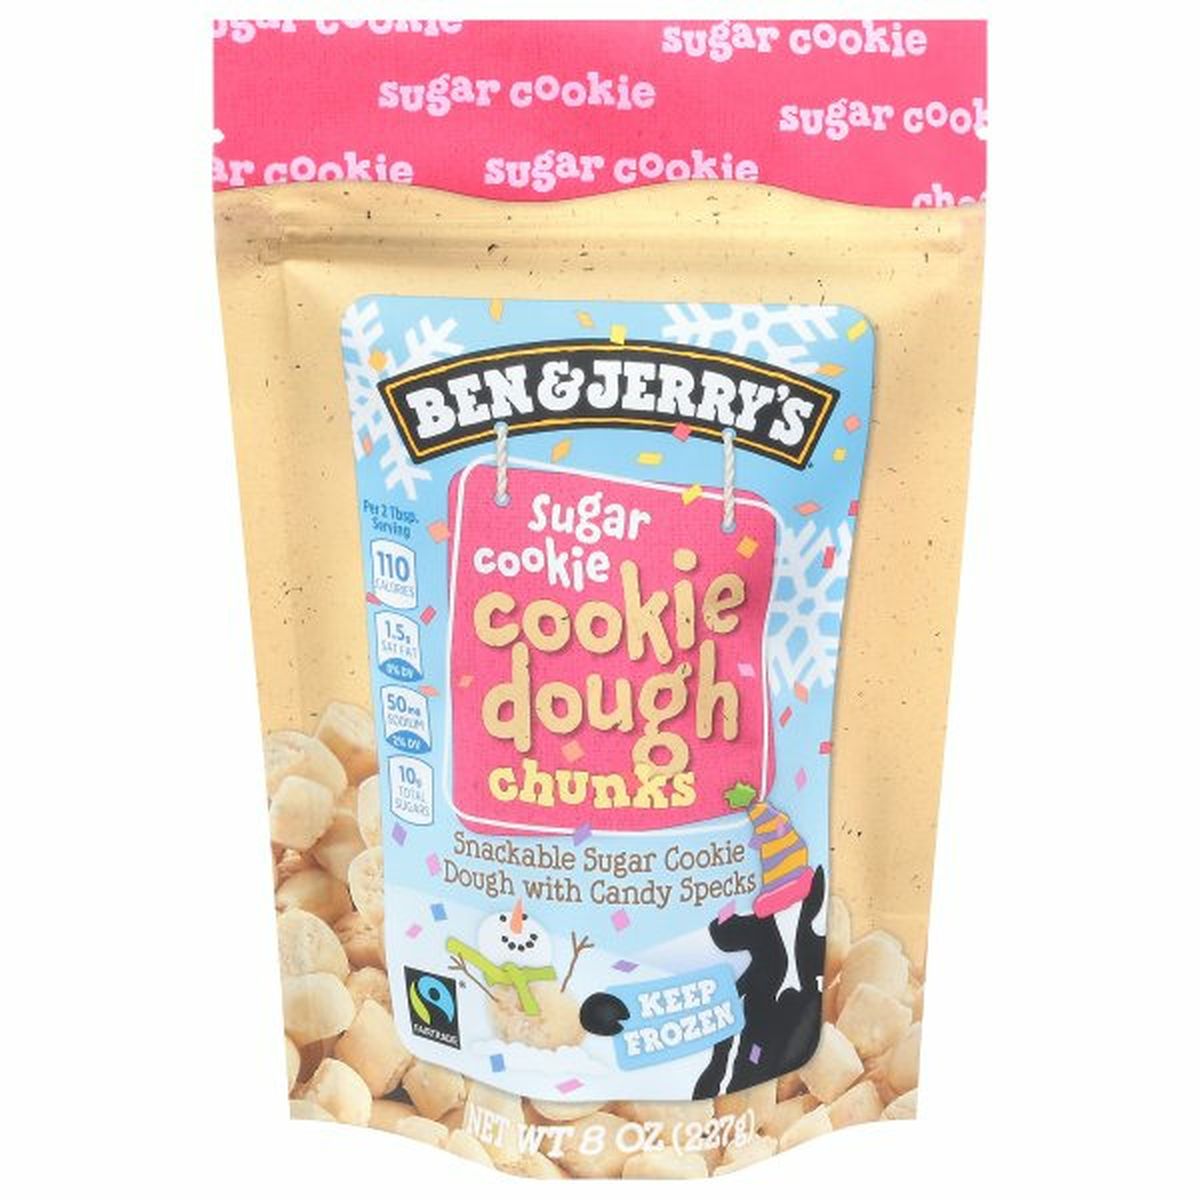 Calories in Ben & Jerry's Cookie Dough Chunks, Sugar Cookie